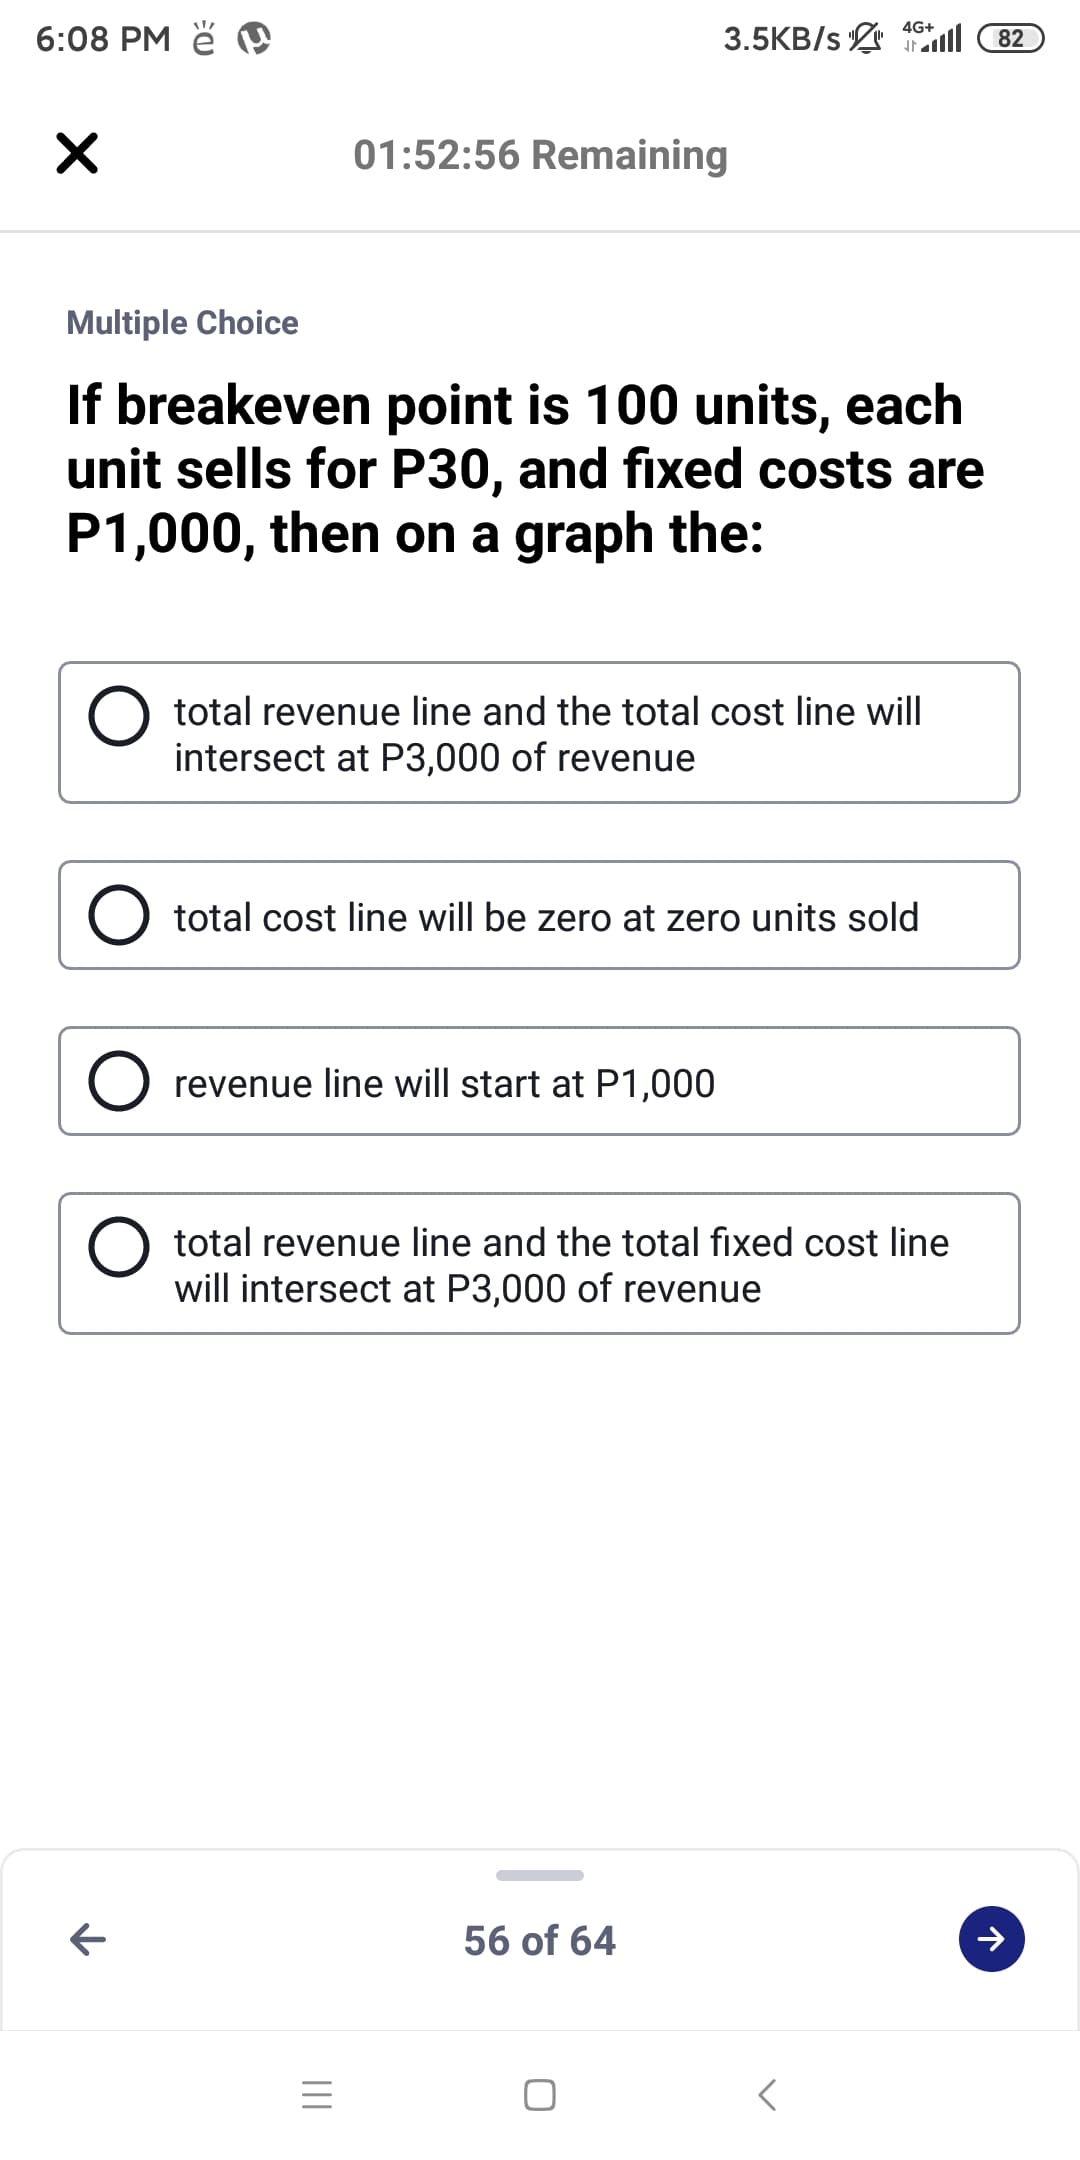 6:08 PM ě
3.5KB/s 1l 82
4G+
01:52:56 Remaining
Multiple Choice
If breakeven point is 100 units, each
unit sells for P30, and fixed costs are
P1,000, then on a graph the:
total revenue line and the total cost line will
intersect at P3,000 of revenue
O total cost line will be zero at zero units sold
revenue line will start at P1,000
total revenue line and the total fixed cost line
will intersect at P3,000 of revenue
56 of 64
II
レ
